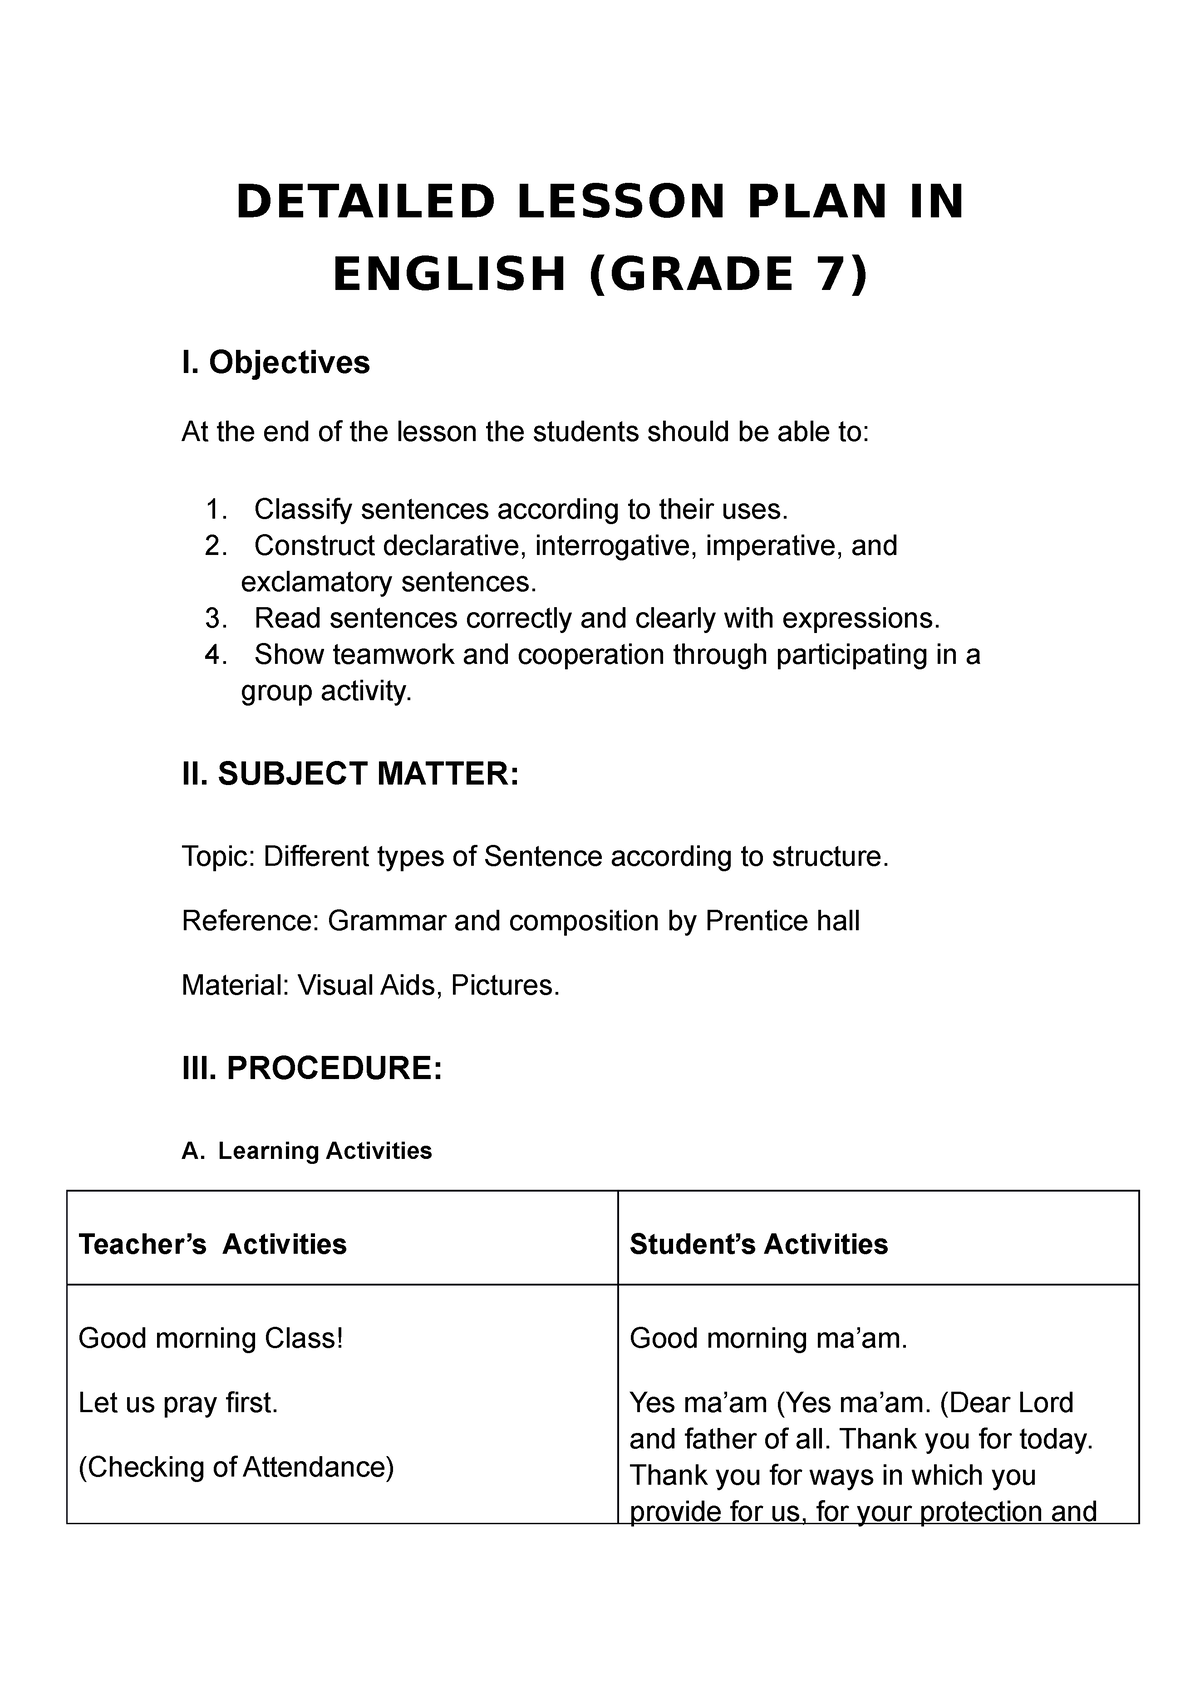 detailed-lesson-plan-in-english-grade-7-detailed-lesson-plan-in